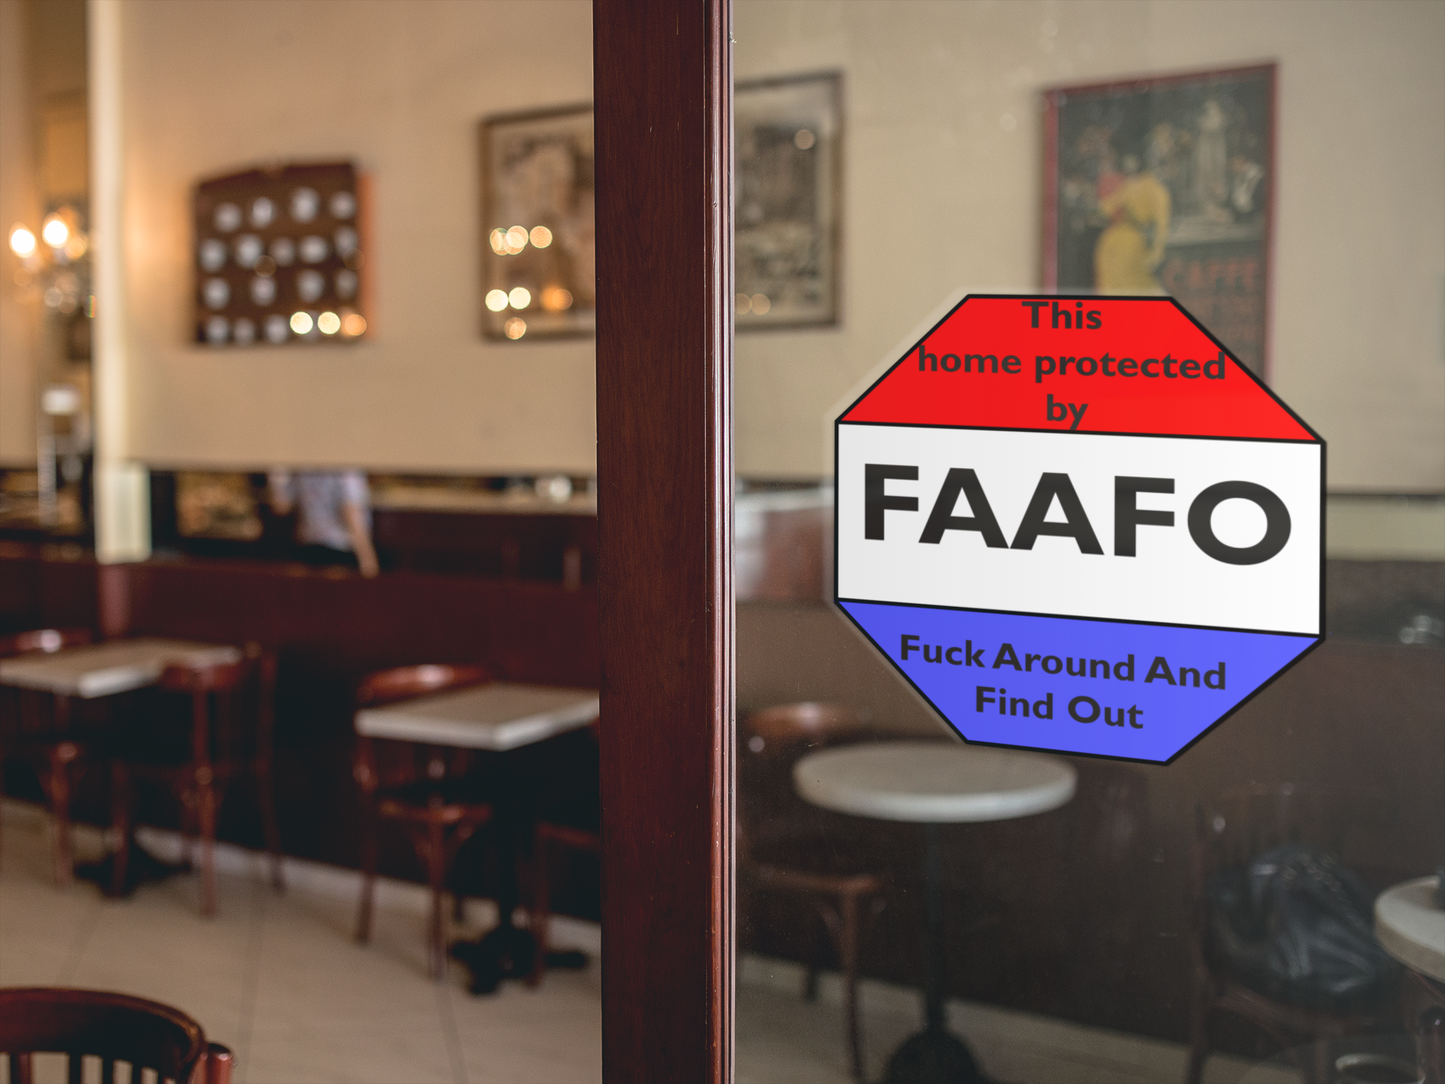 This house is protected by FAAFO - Bubble-free stickers